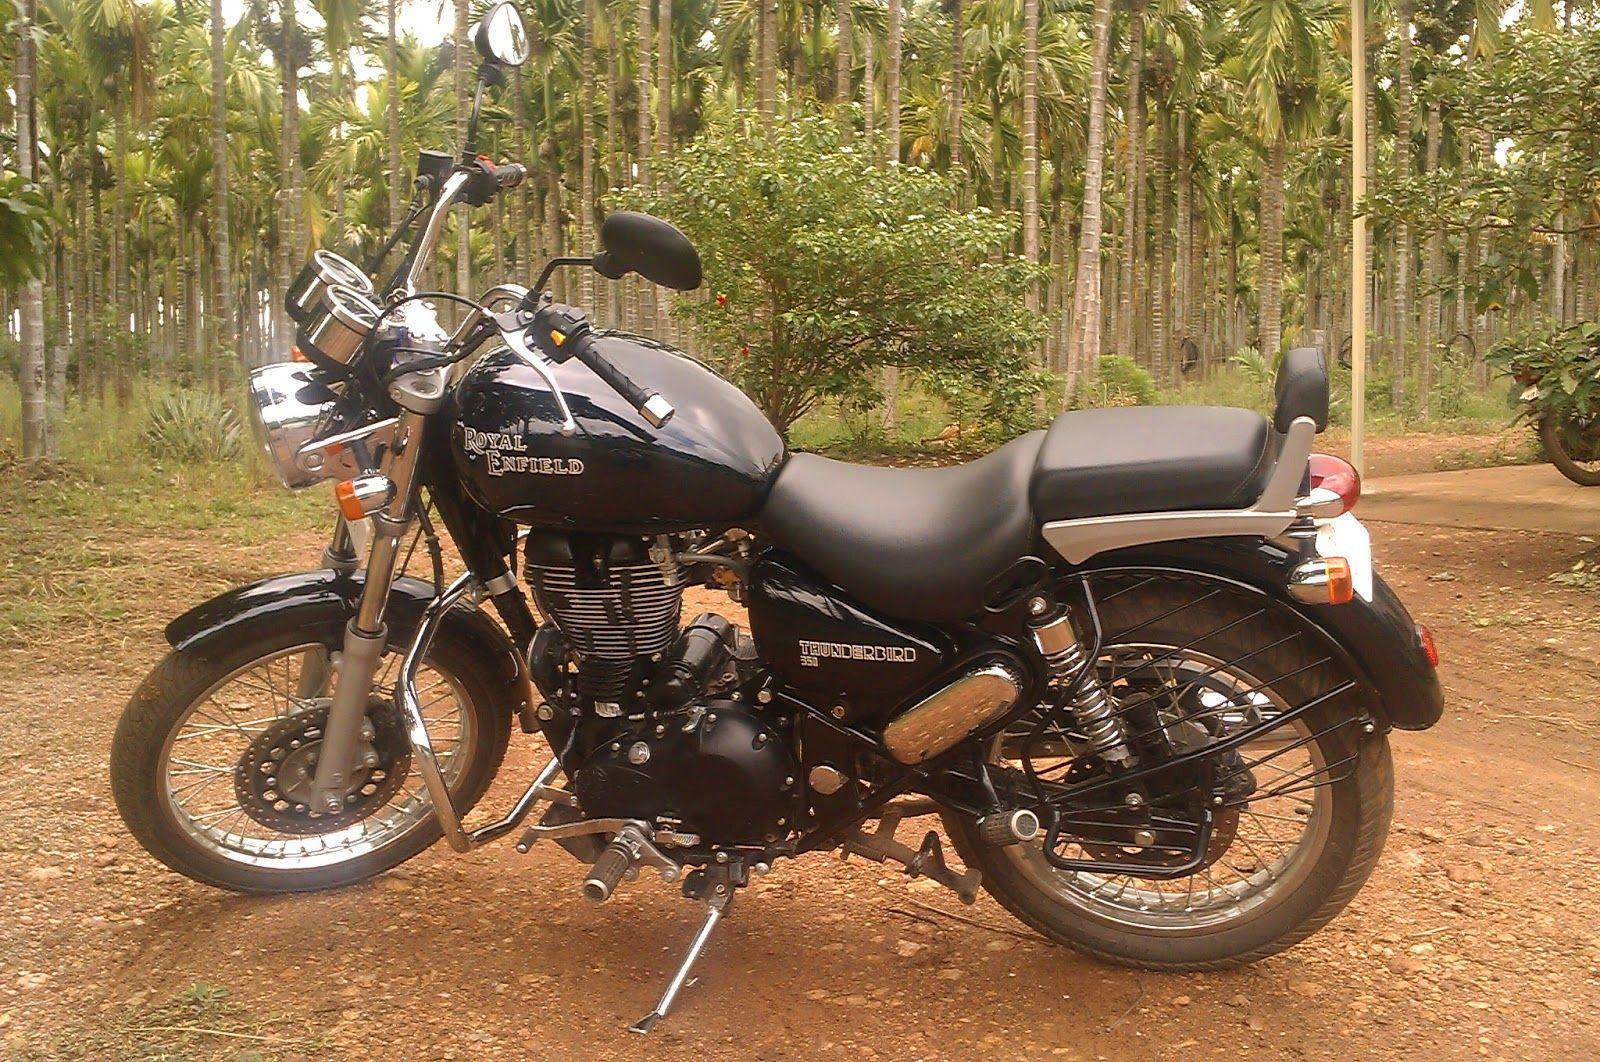 Royal Enfield Thunderbird 350 HD Picture Latest New